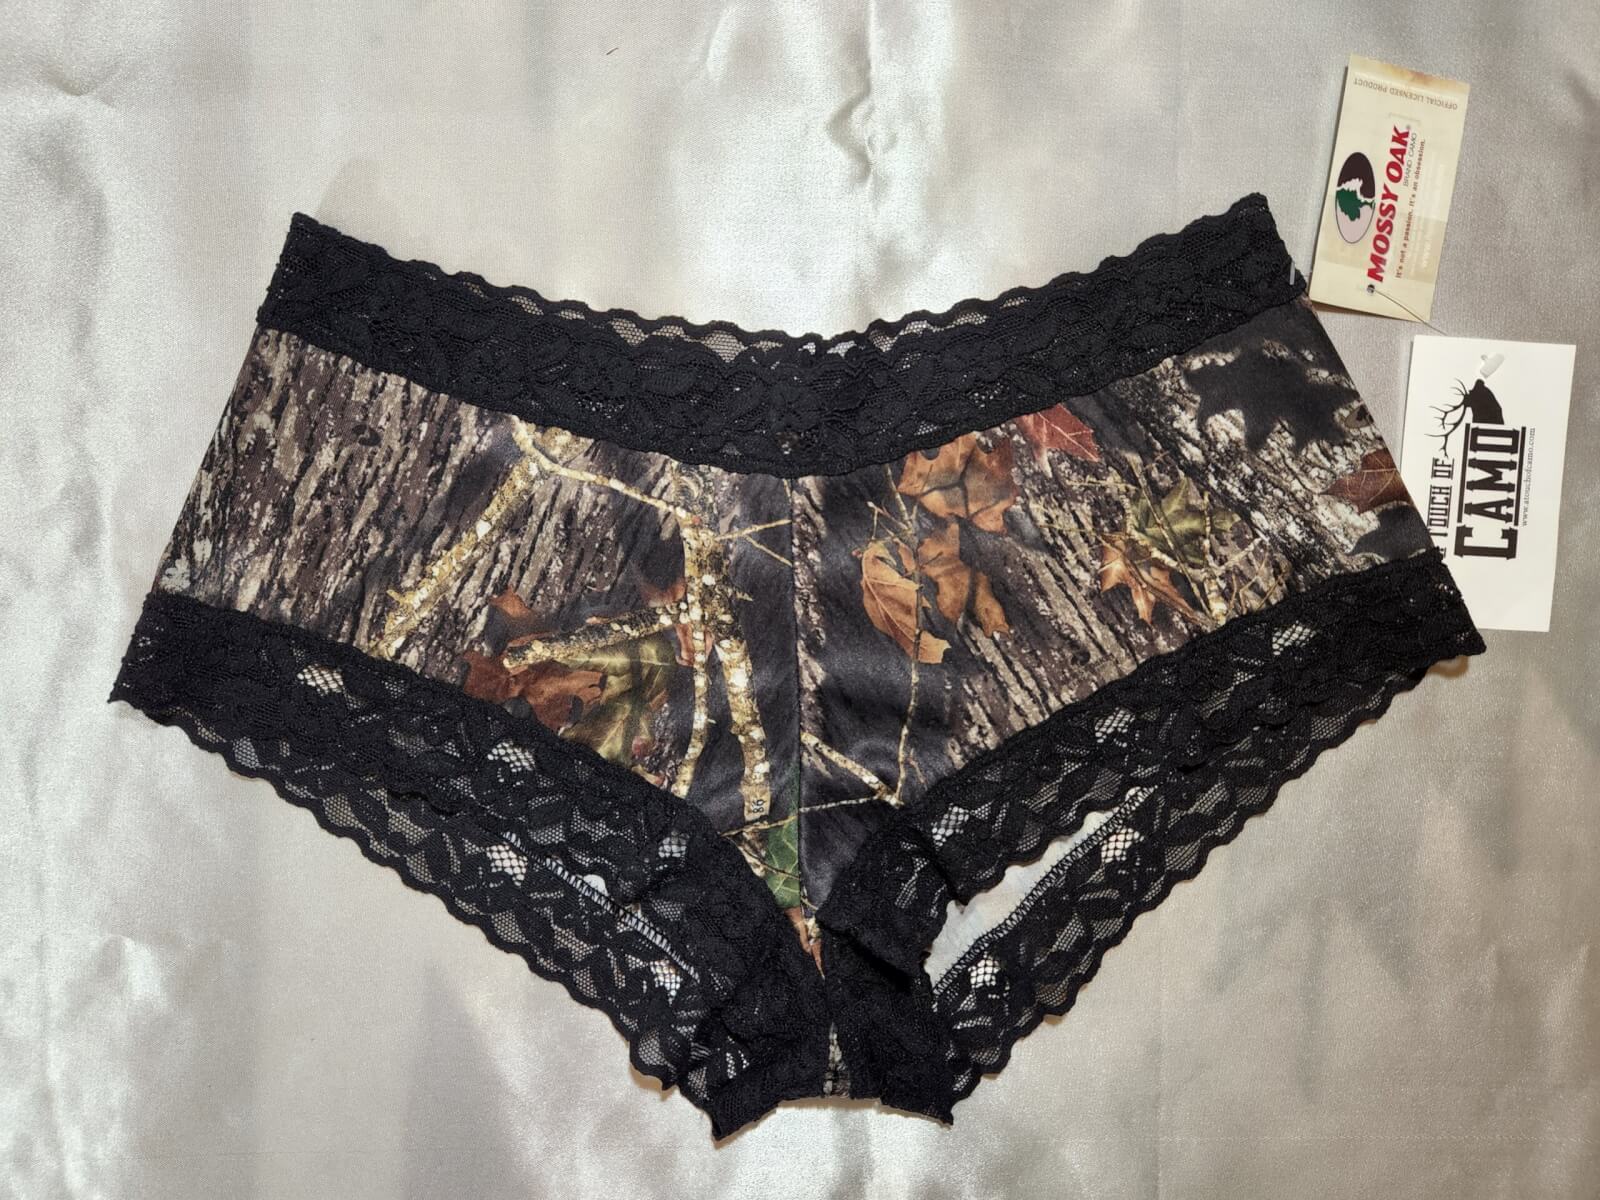 Lace Trimmed Boy Short Panty in Mossy Oak Camo Size M - A Touch of